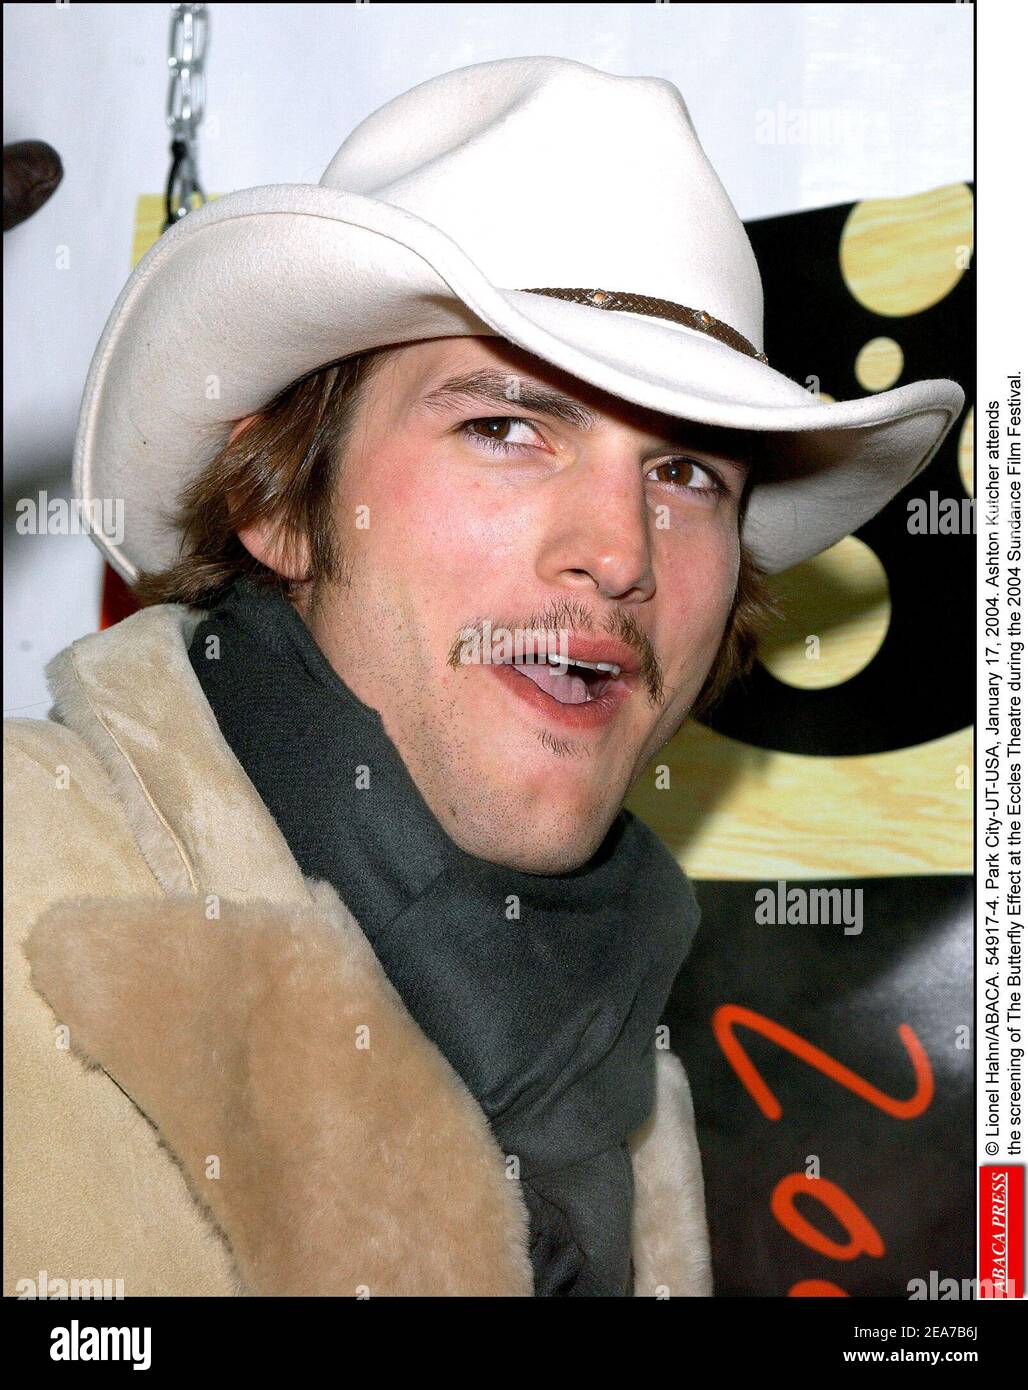 © Lionel Hahn/ABACA. 54917-4. Park City-UT-USA, January 17, 2004. Ashton Kutcher attends the screening of The Butterfly Effect at the Eccles Theatre during the 2004 Sundance Film Festival. Stock Photo